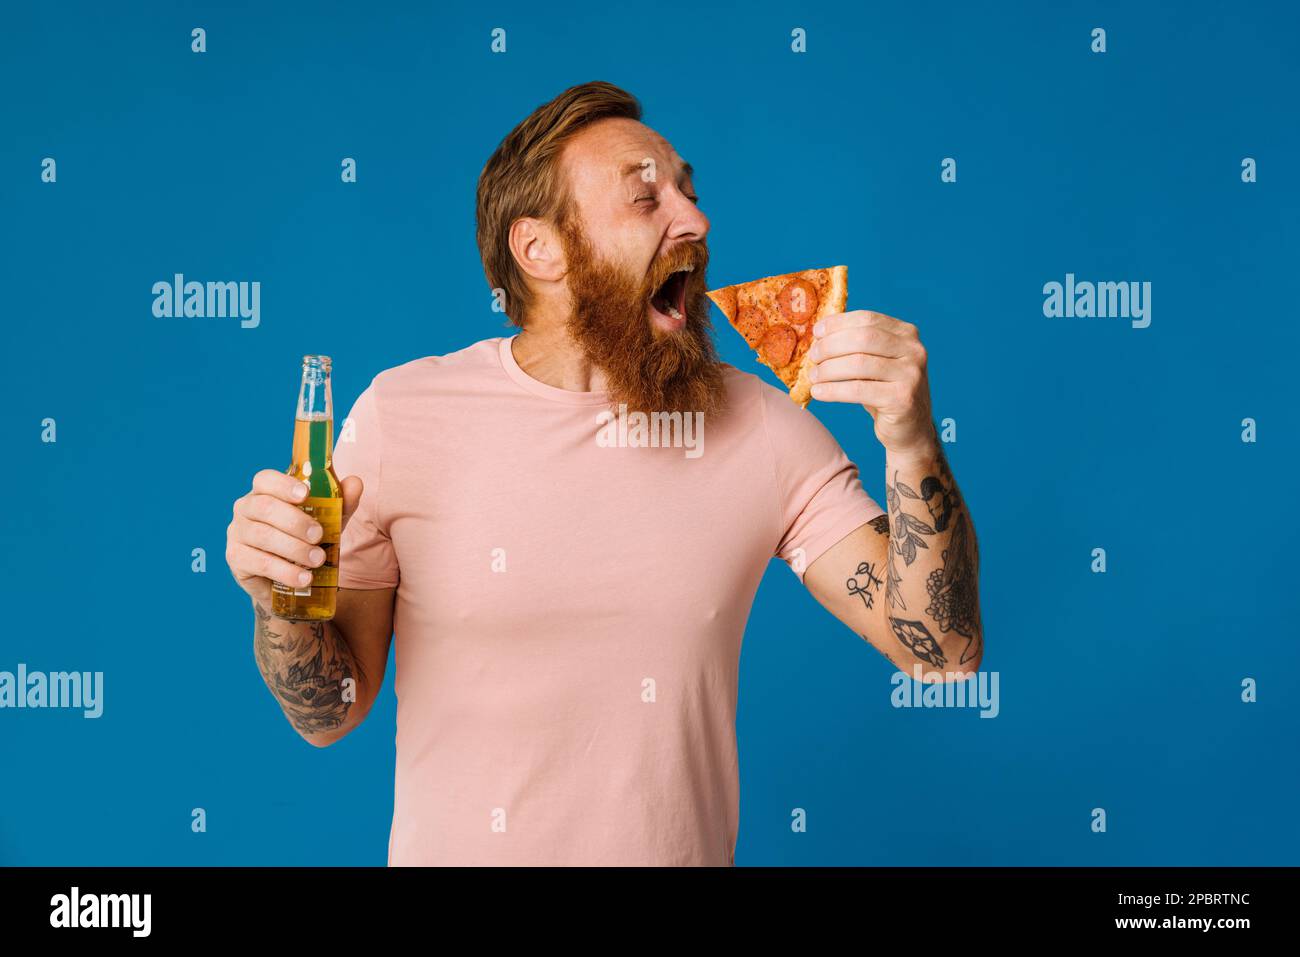 Hungry bearded man eating pizza and holding beer isolated over blue background Stock Photo